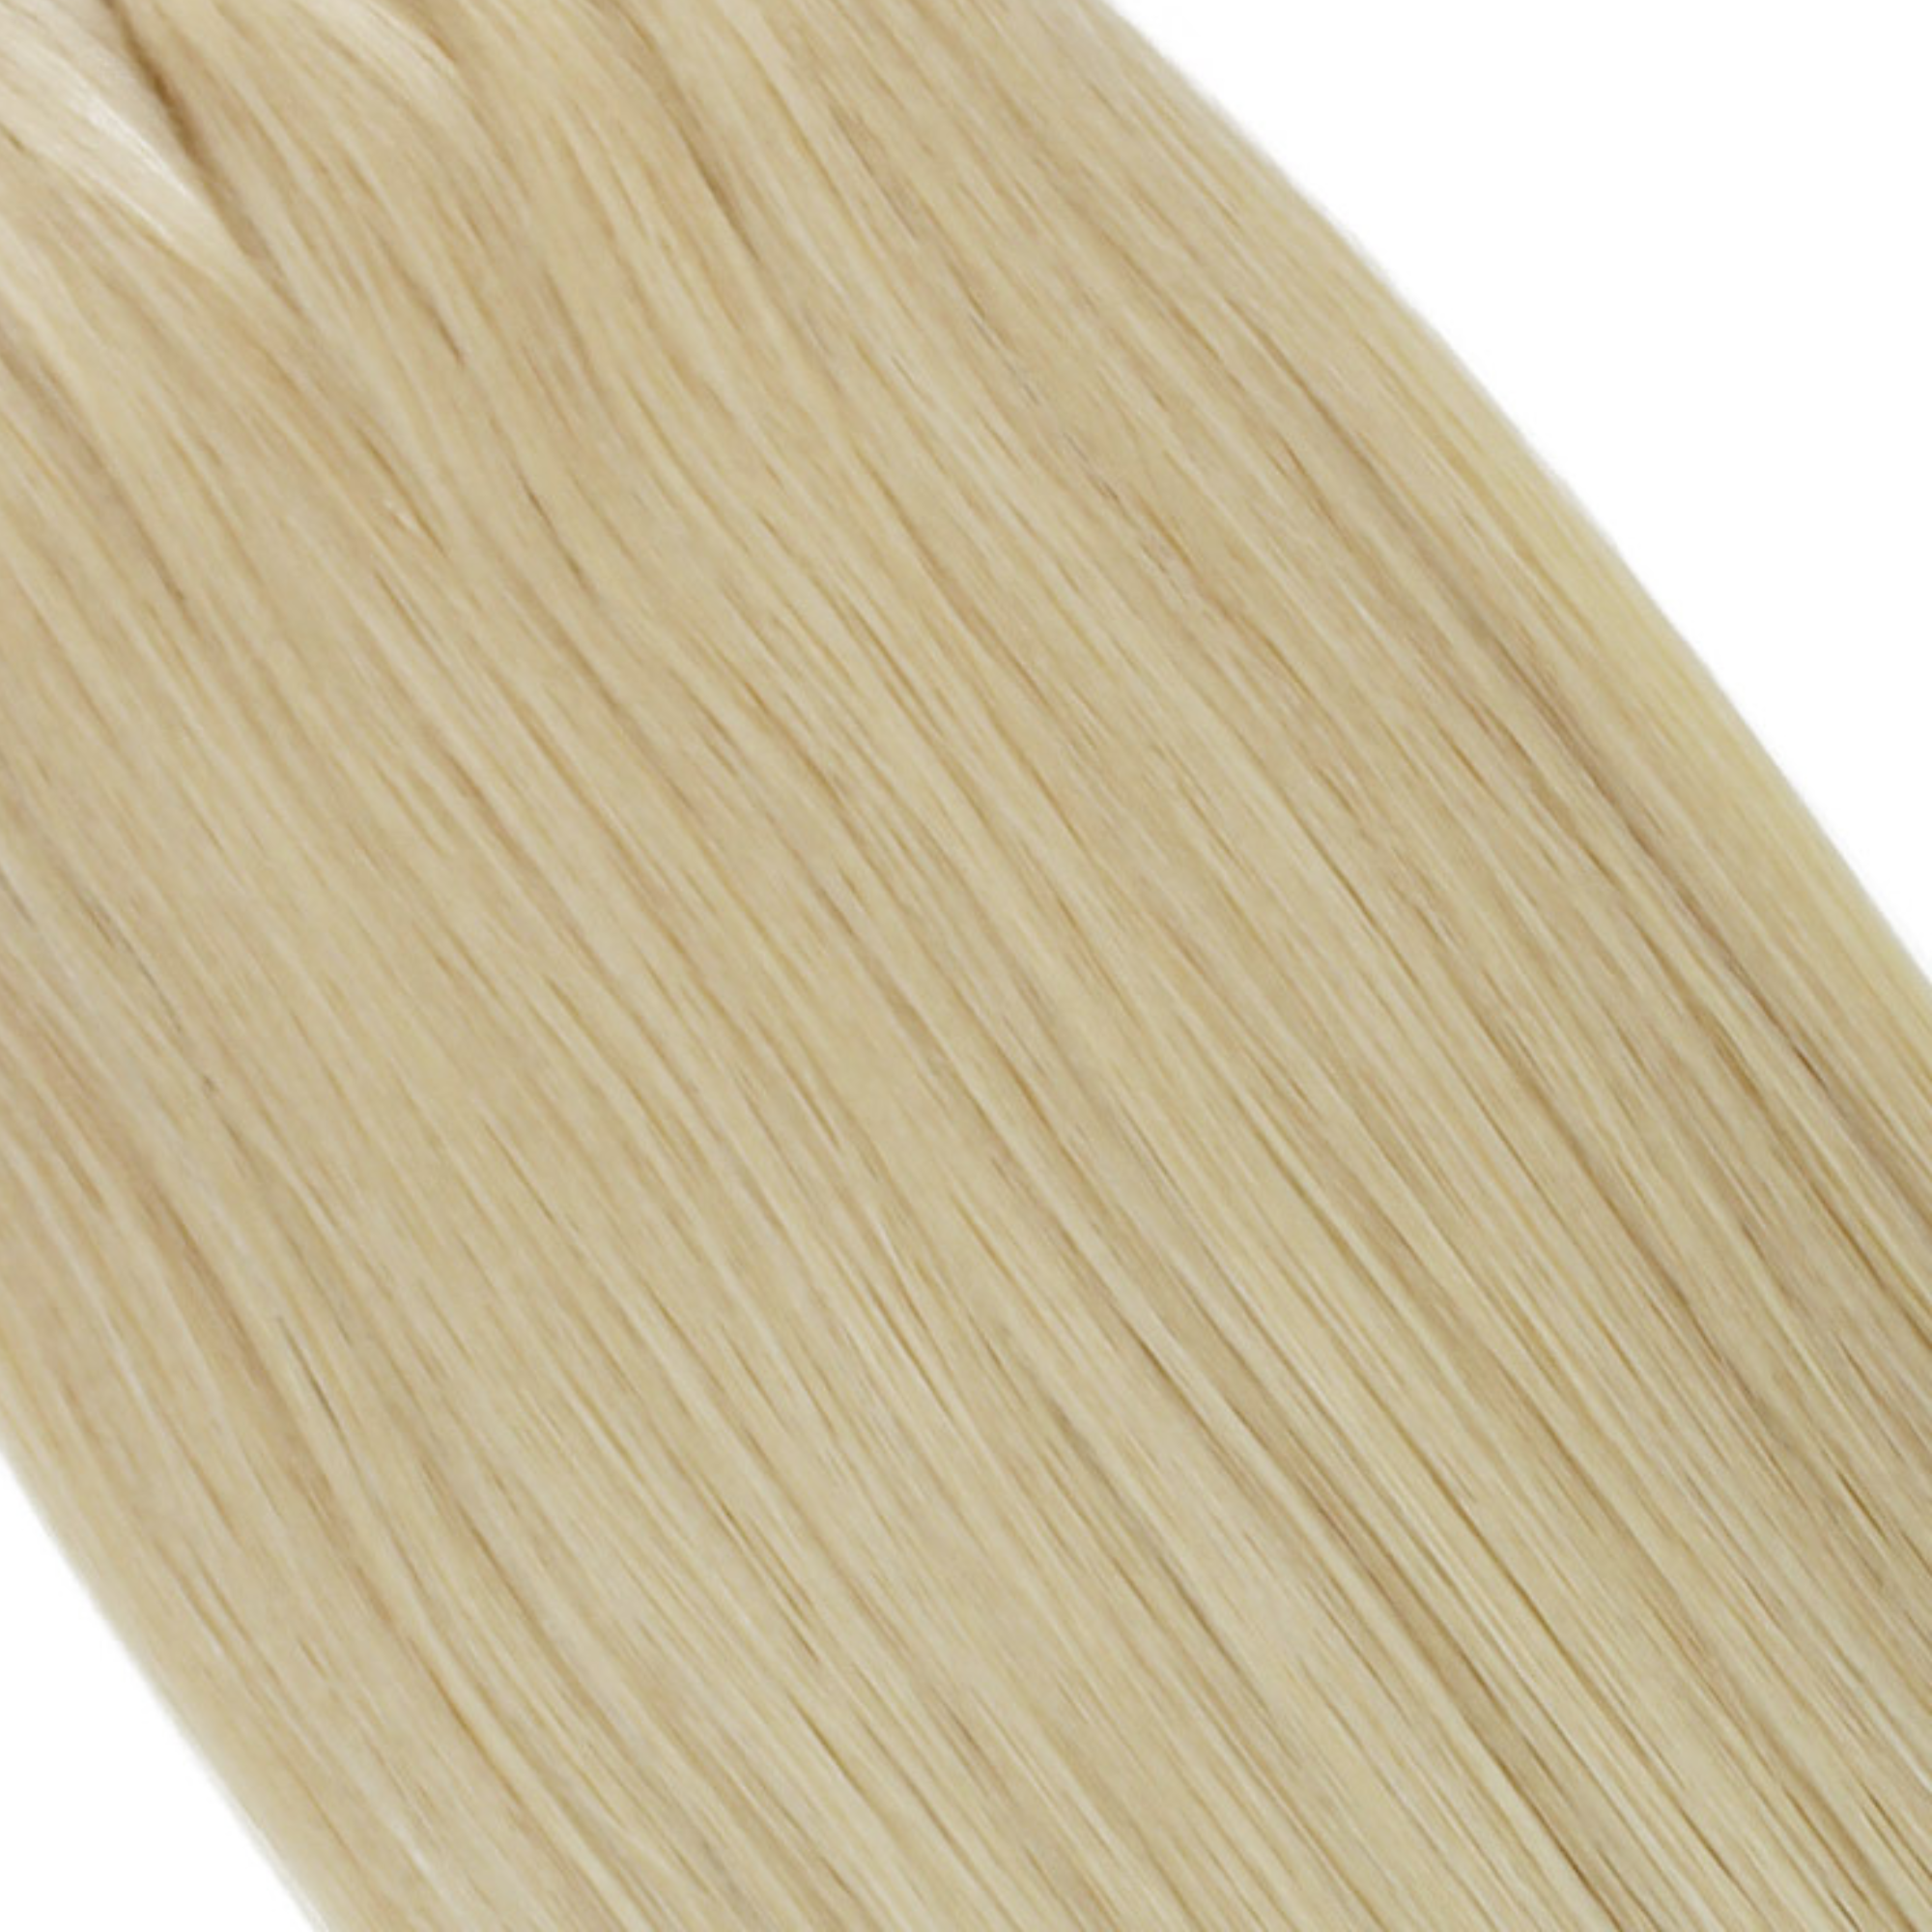 "hair rehab london 18" length 120 grams weight original clip-in hair extensions shade titled ice blonde"